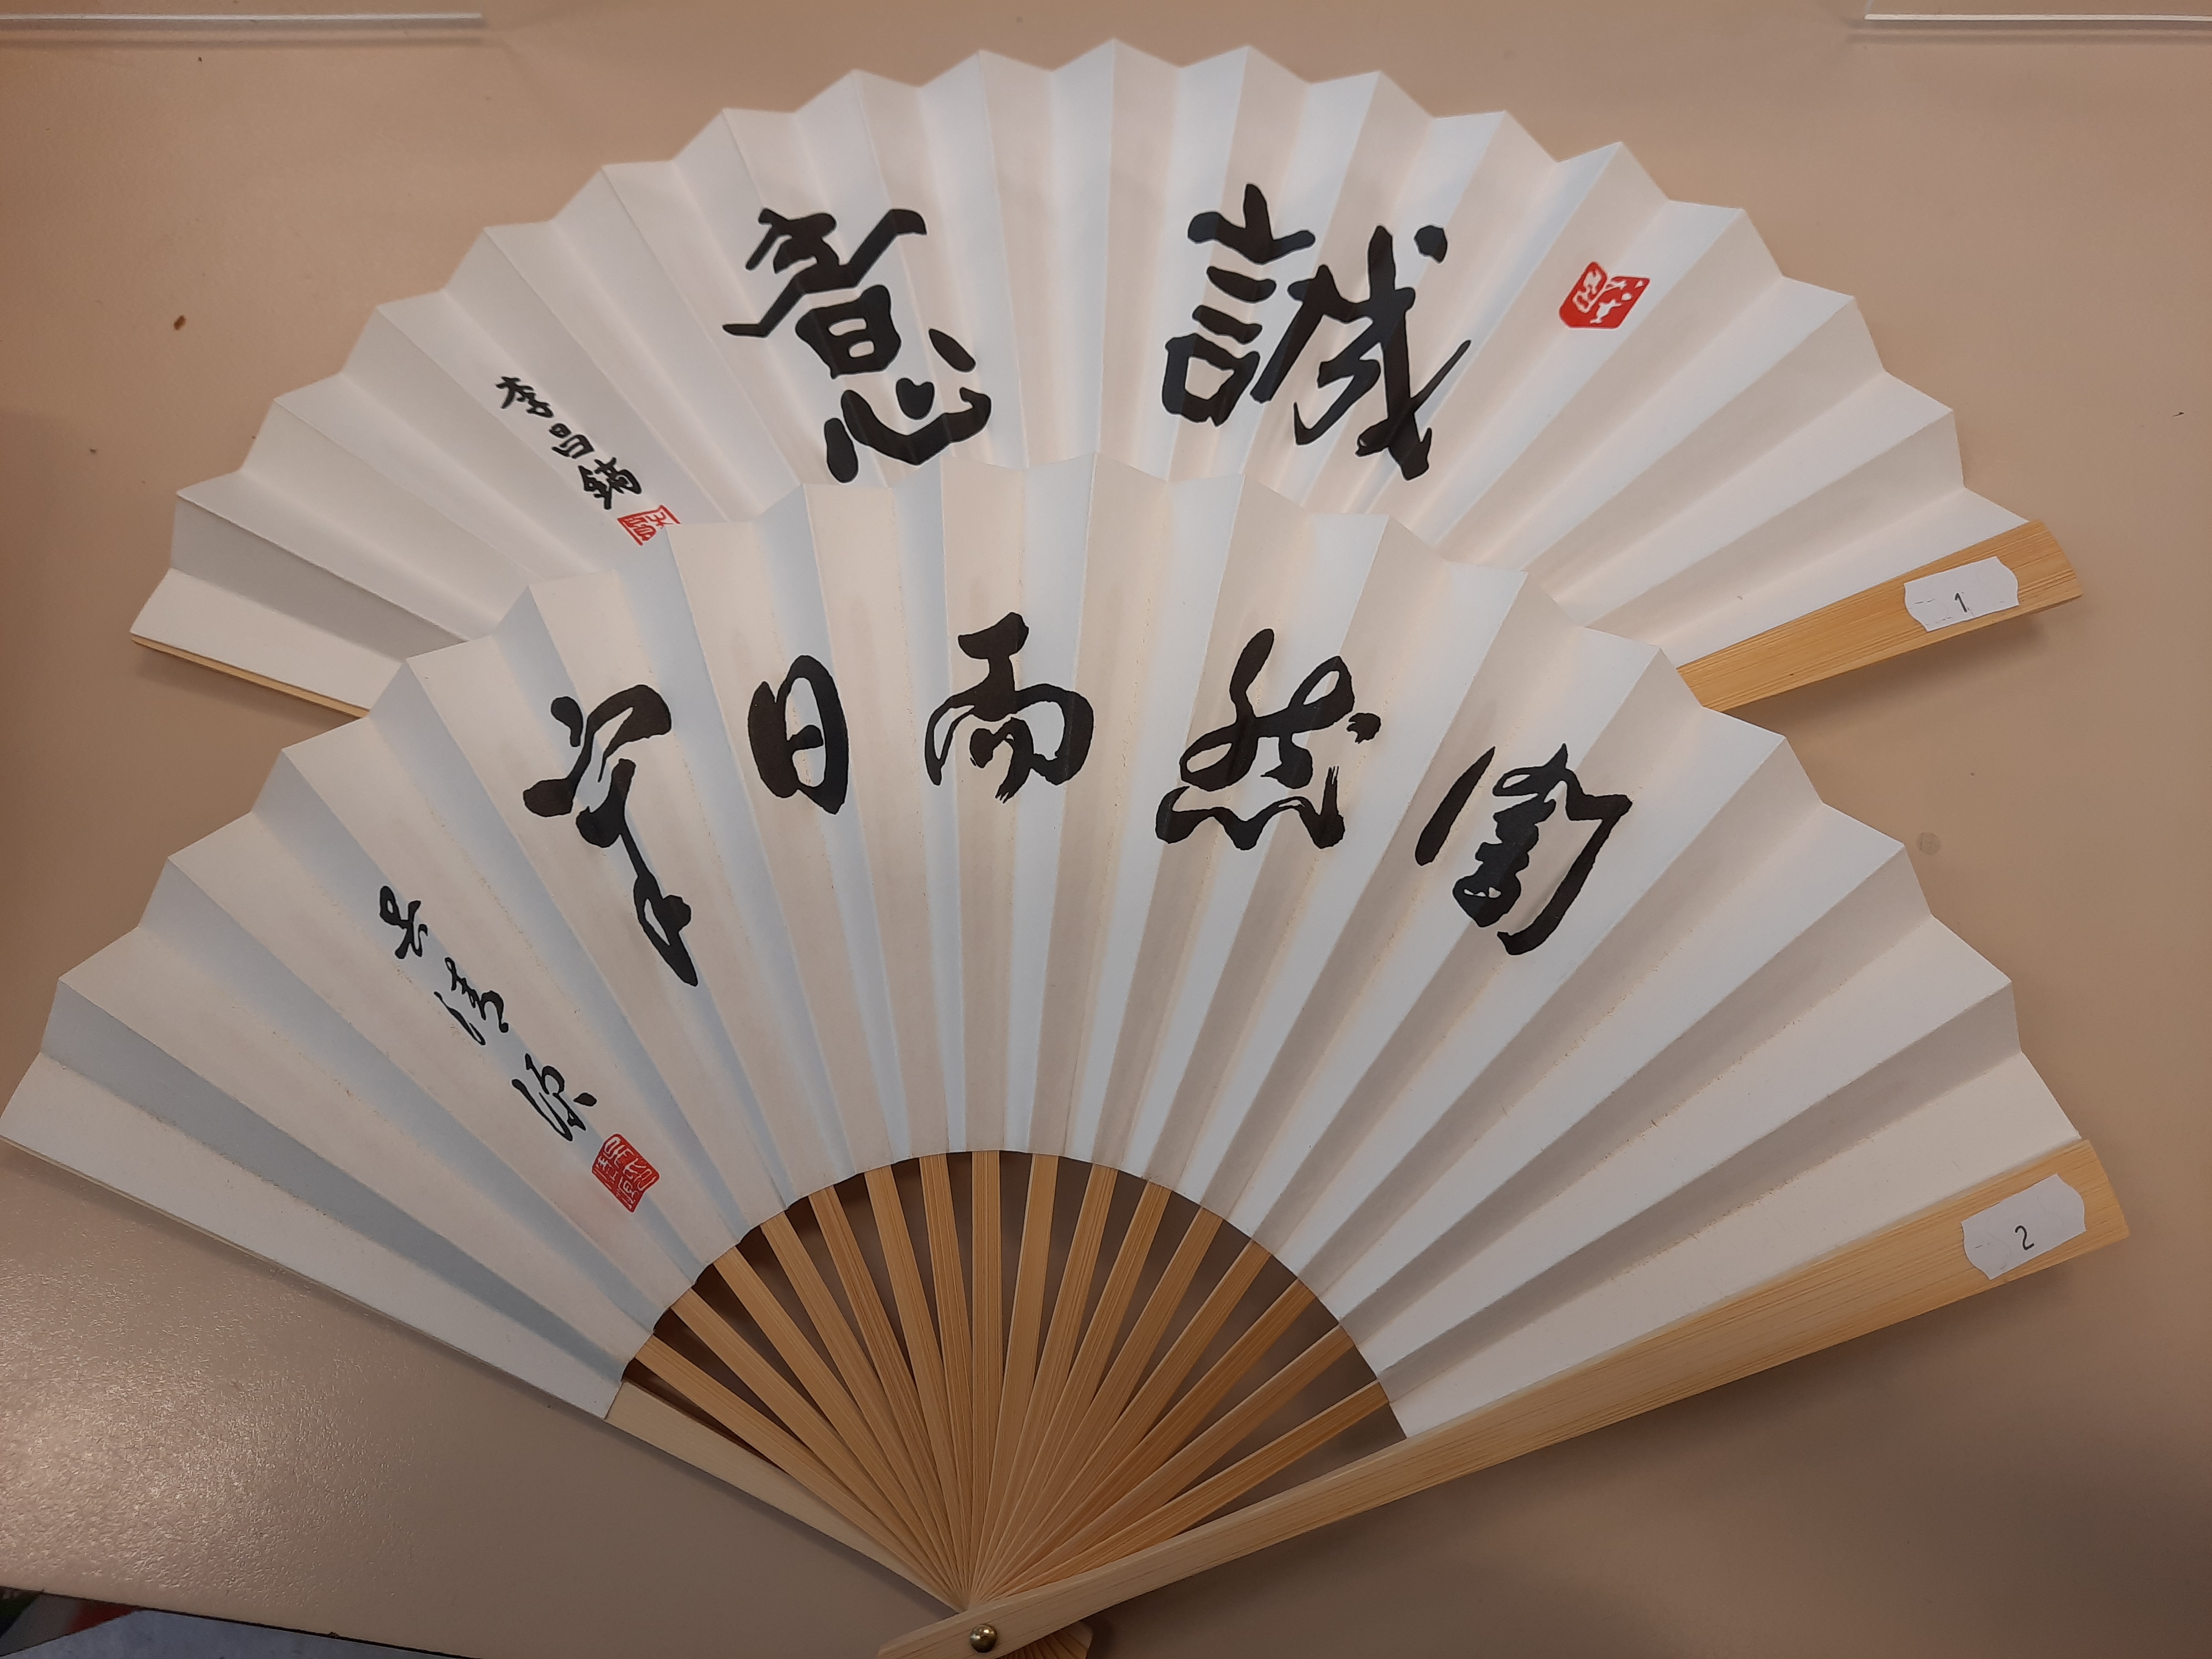 Fan with Go proverb